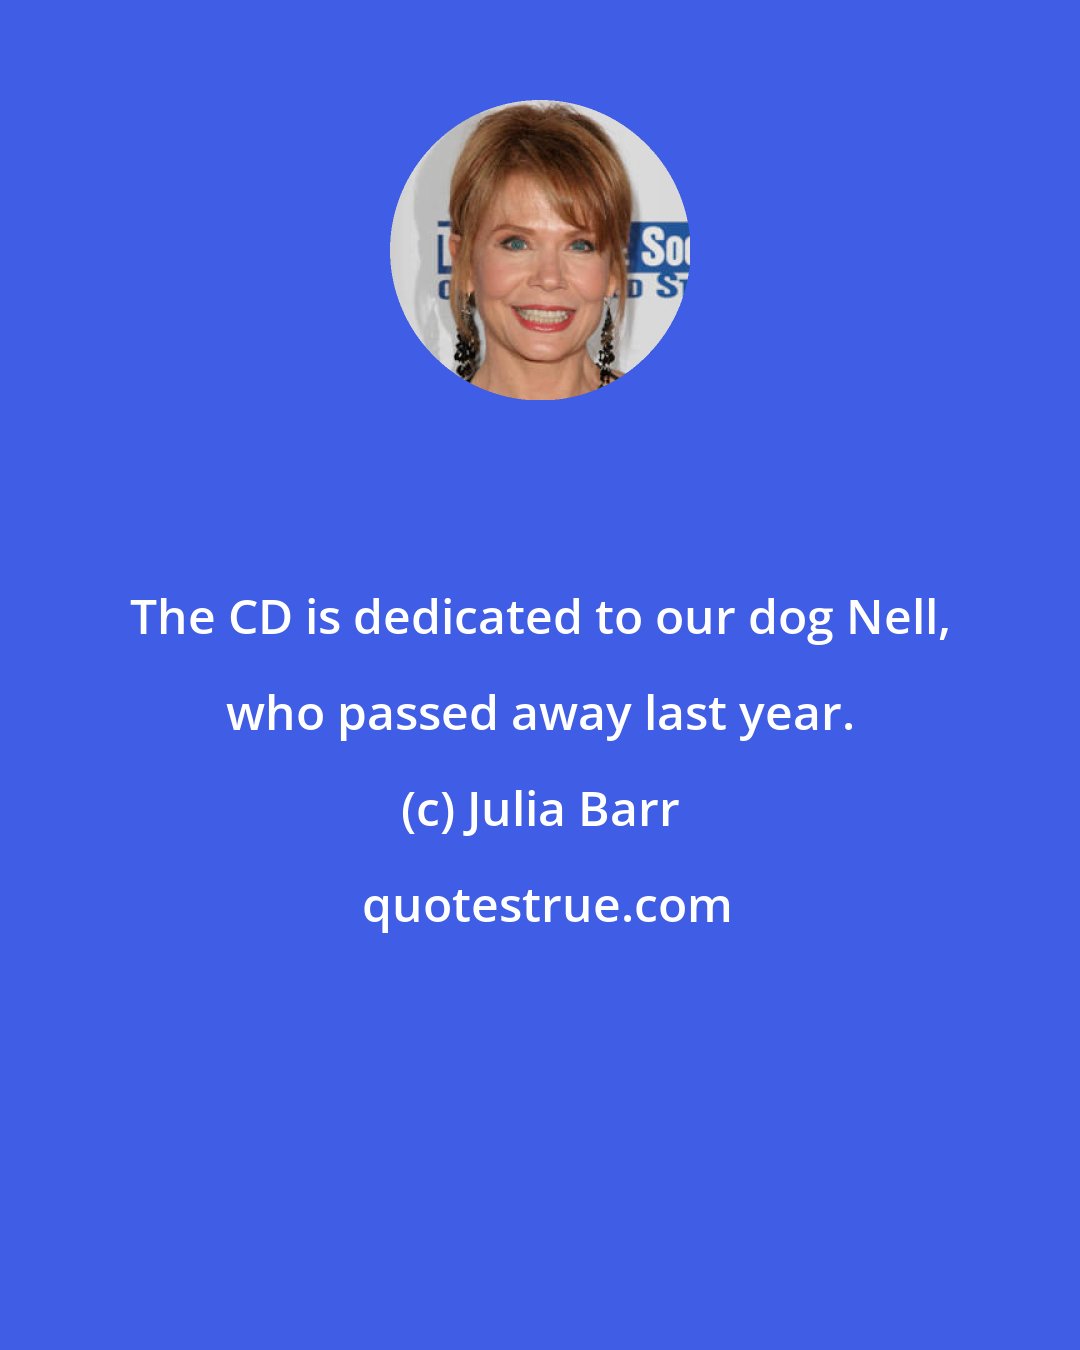 Julia Barr: The CD is dedicated to our dog Nell, who passed away last year.